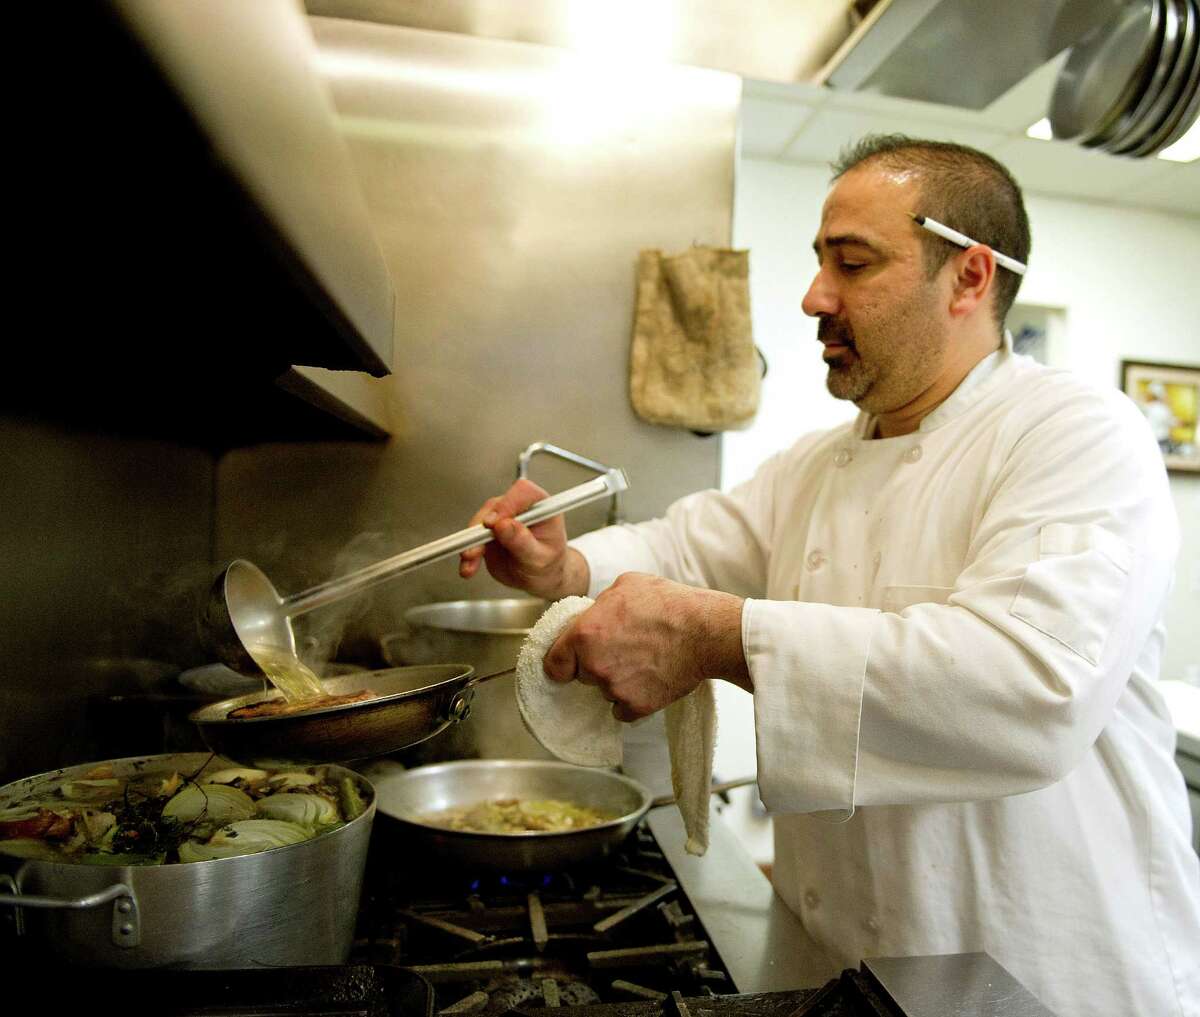 Stephen Costanzo, co-owner and head chef at Olio in Stamford, cooks in the kitchen on Tuesday, March 12, 2013.